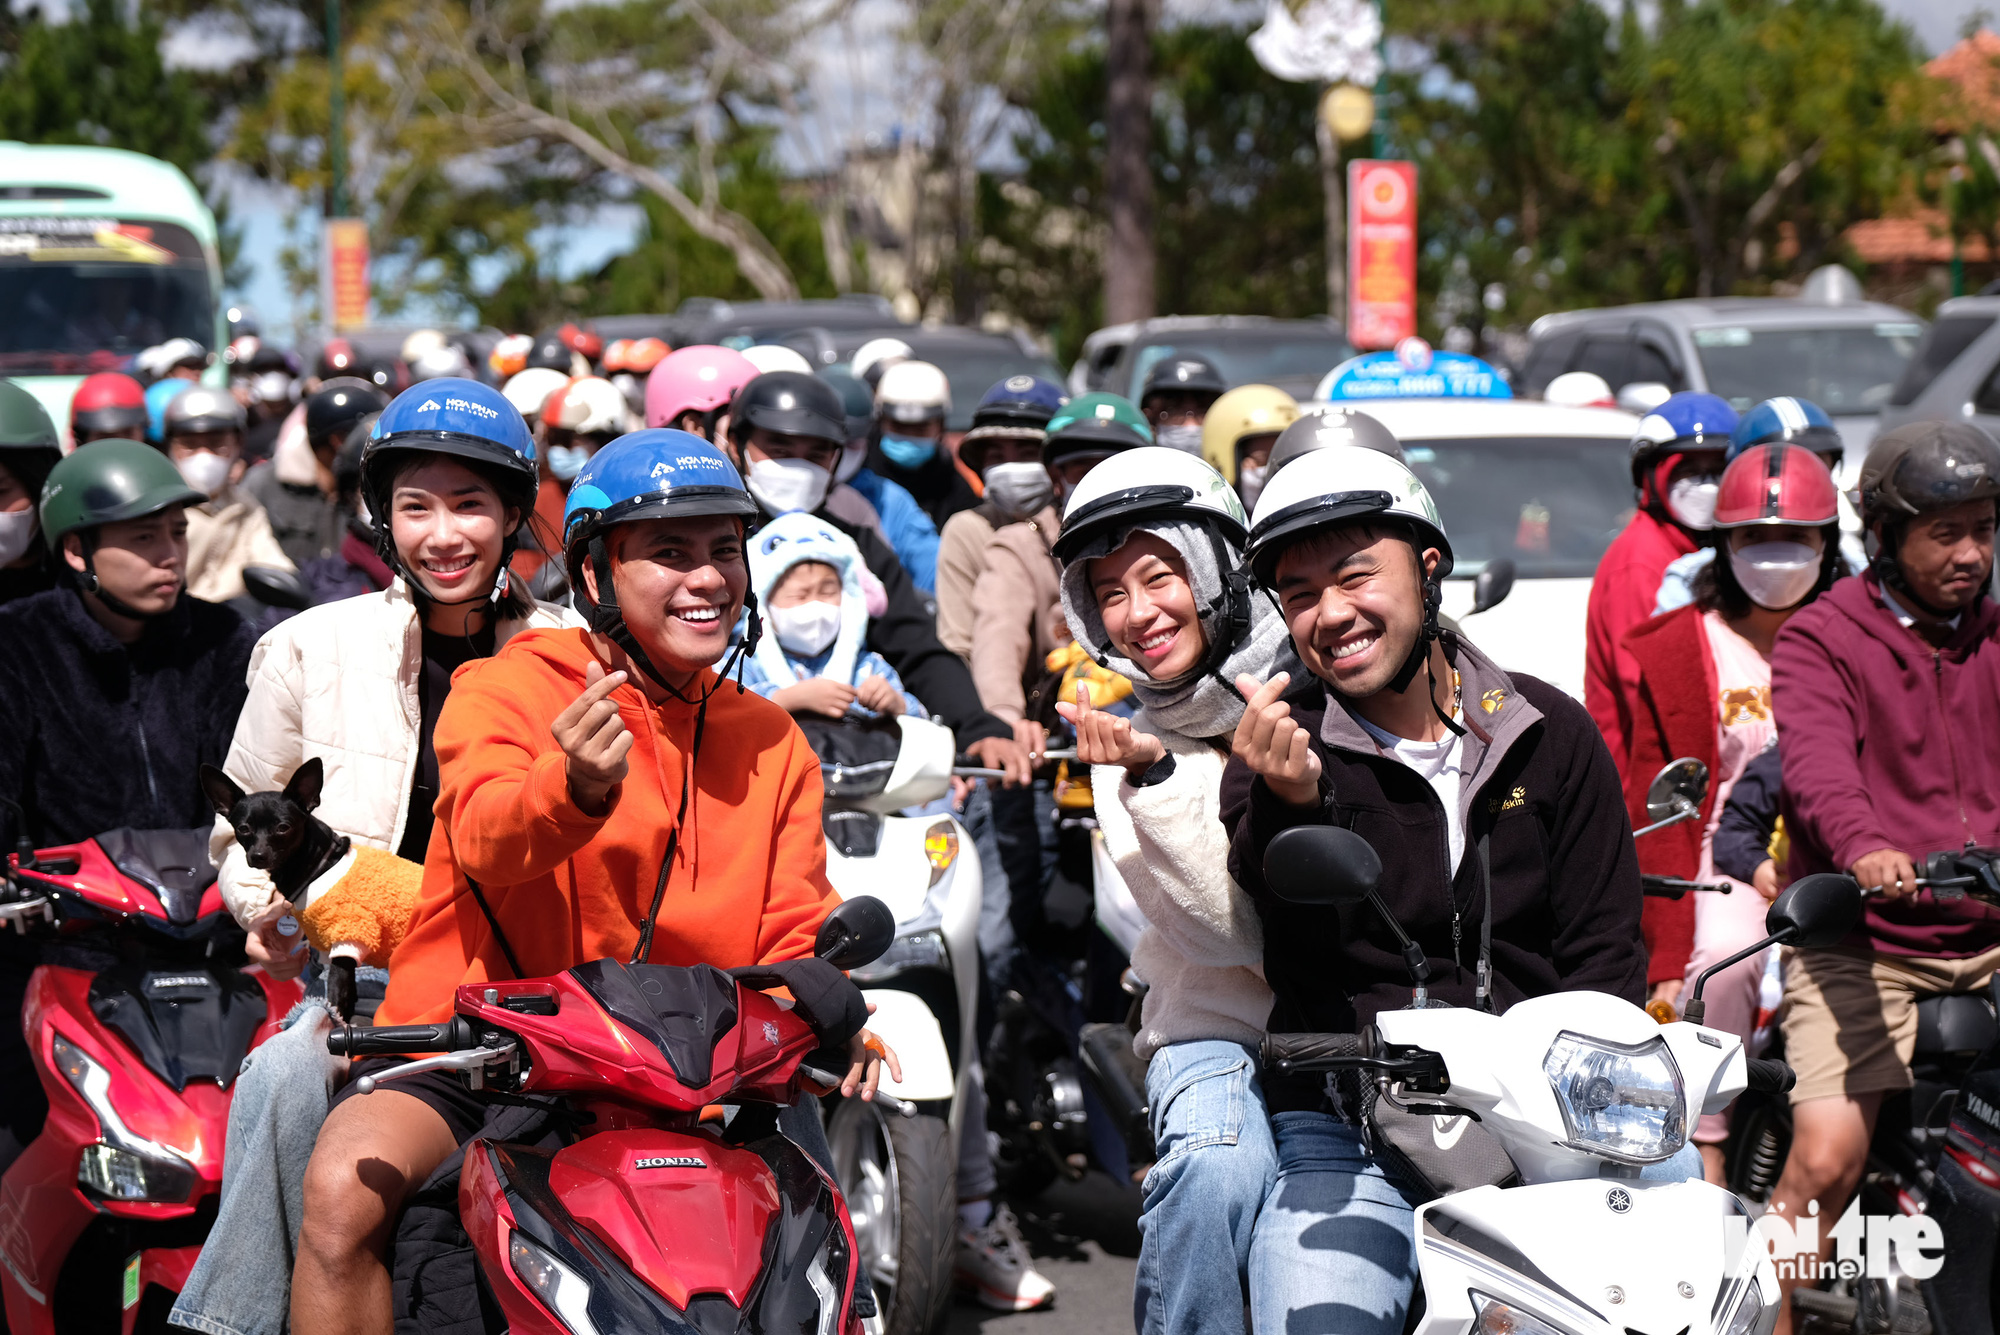 Many young people are seen still joyful despite being stuck in traffic congestion on a street in Da Lat City on January 26, 2023. Photo: Mai Vinh / Tuoi Tre